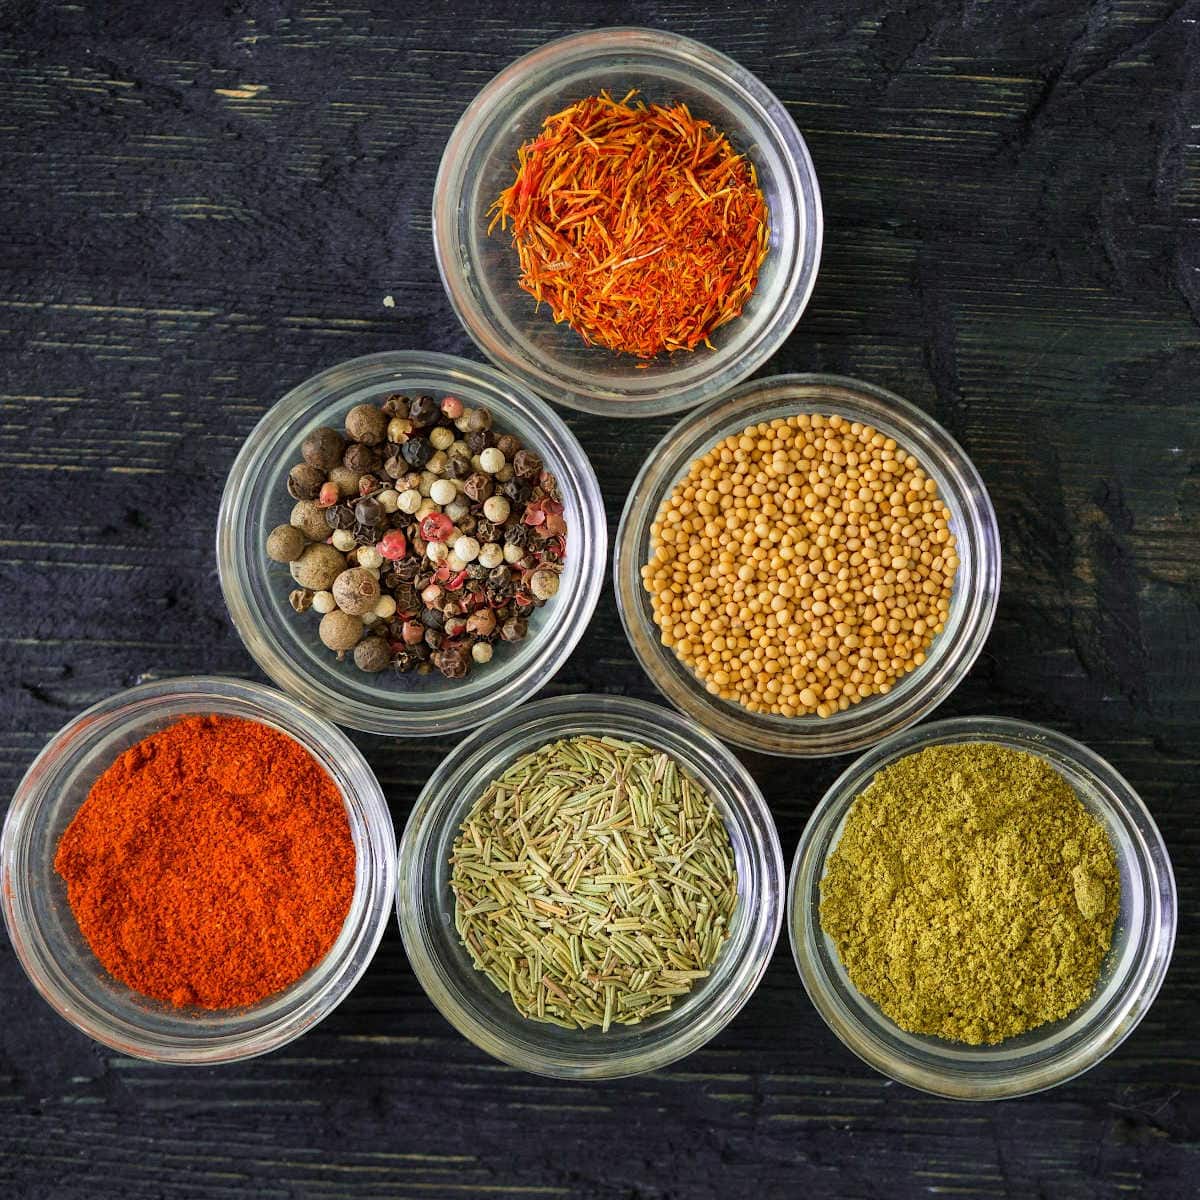 How To Store Herbs And Spices